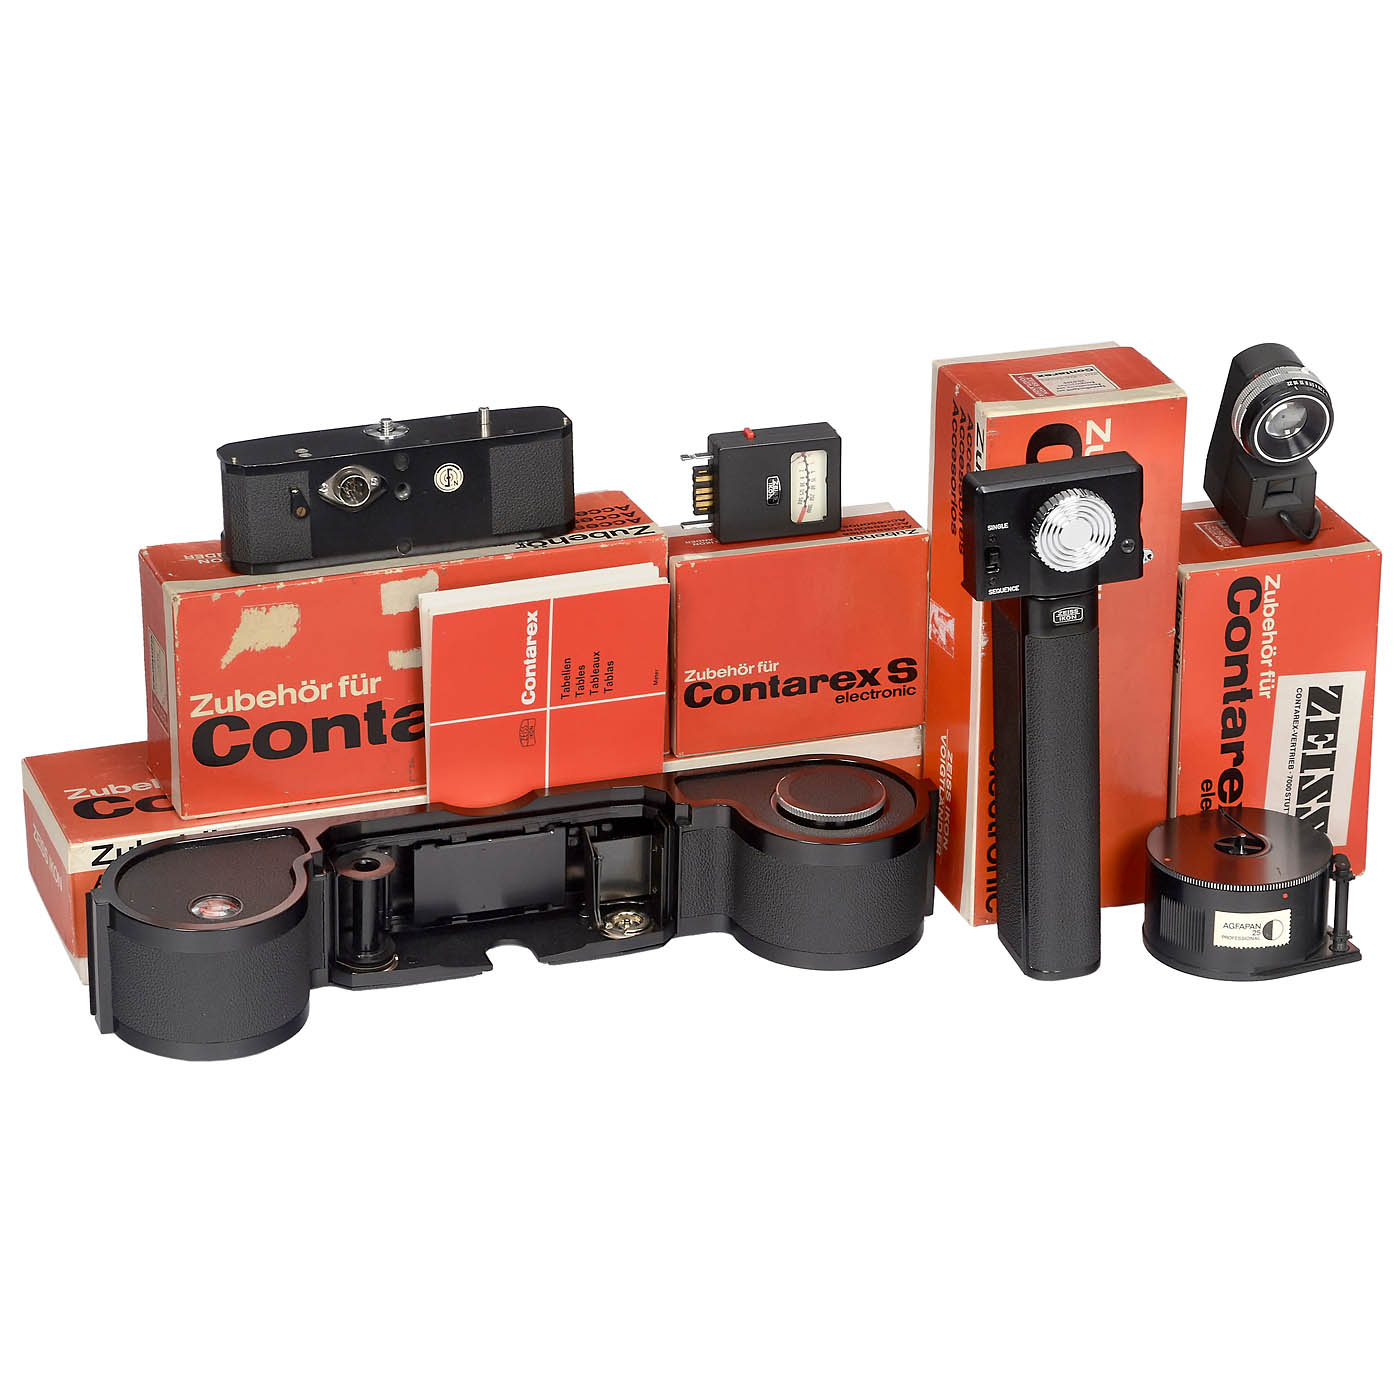 Contarex Sonnar 2.8/180 mm Lens and Contarex electronic Camera - Image 3 of 3